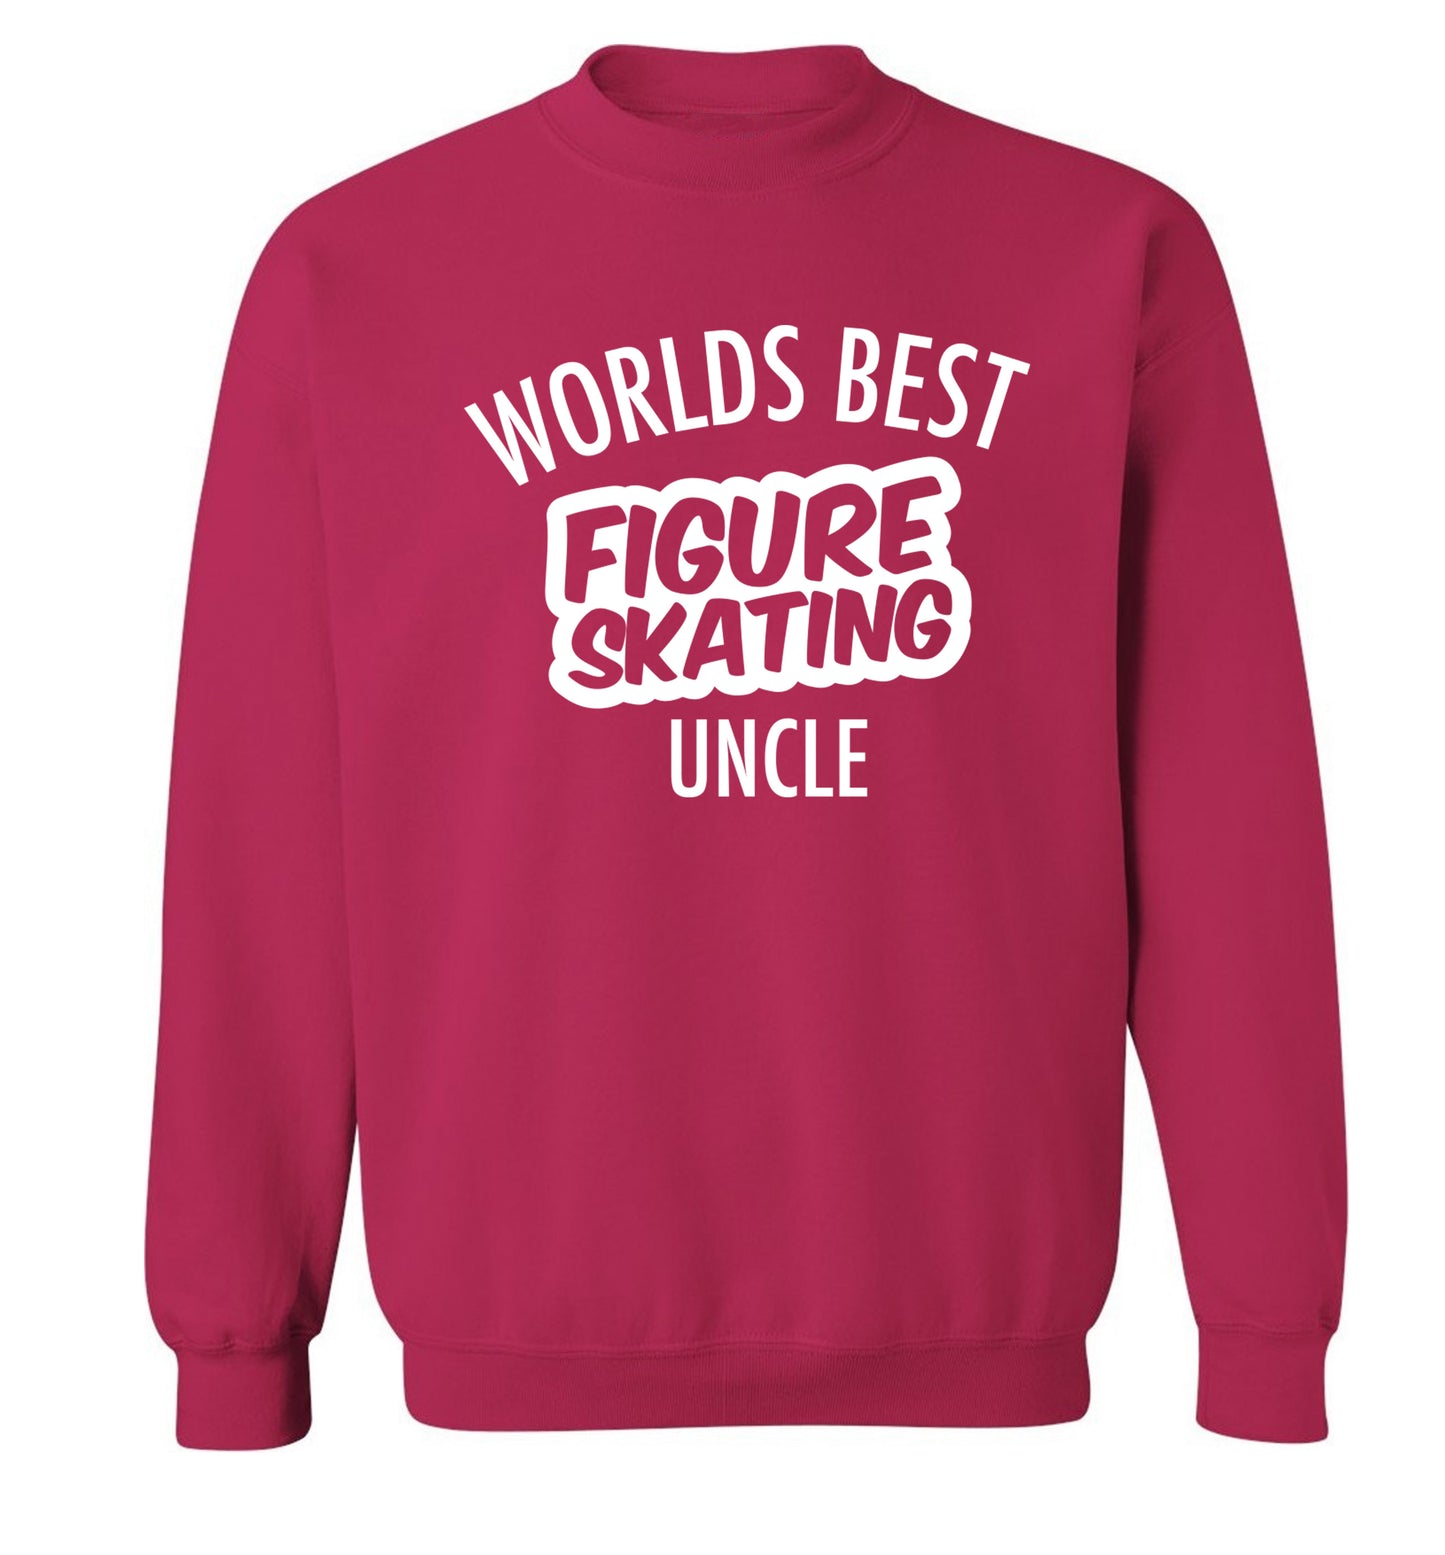 Worlds best figure skating uncle Adult's unisexpink Sweater 2XL